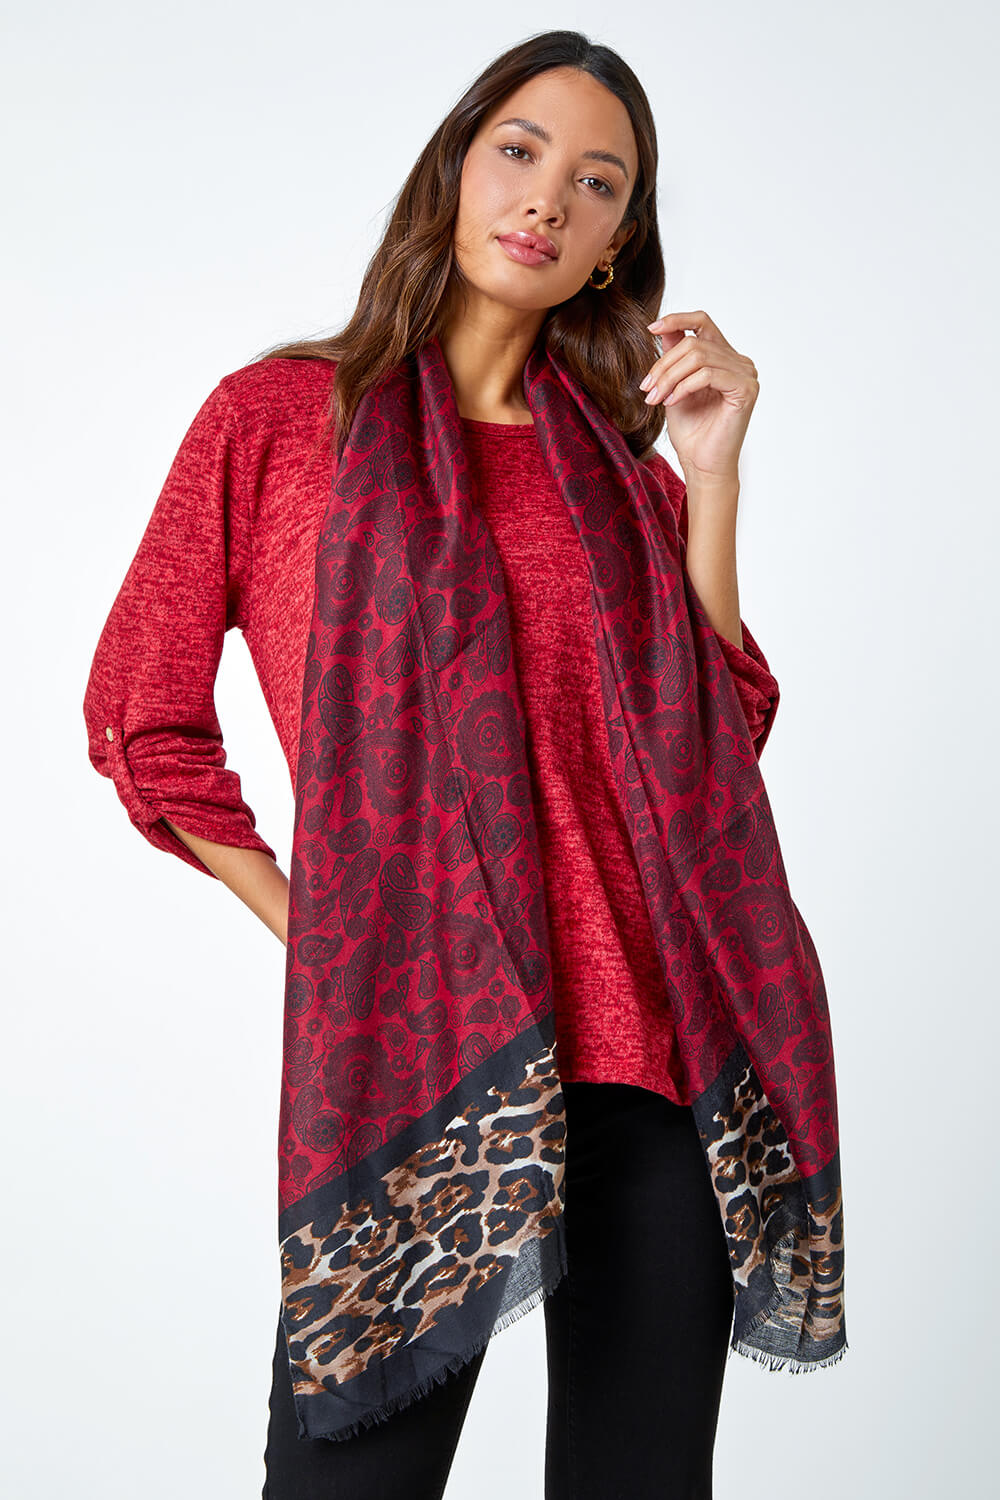 Red Stretch Top with Animal Print Scarf, Image 4 of 5